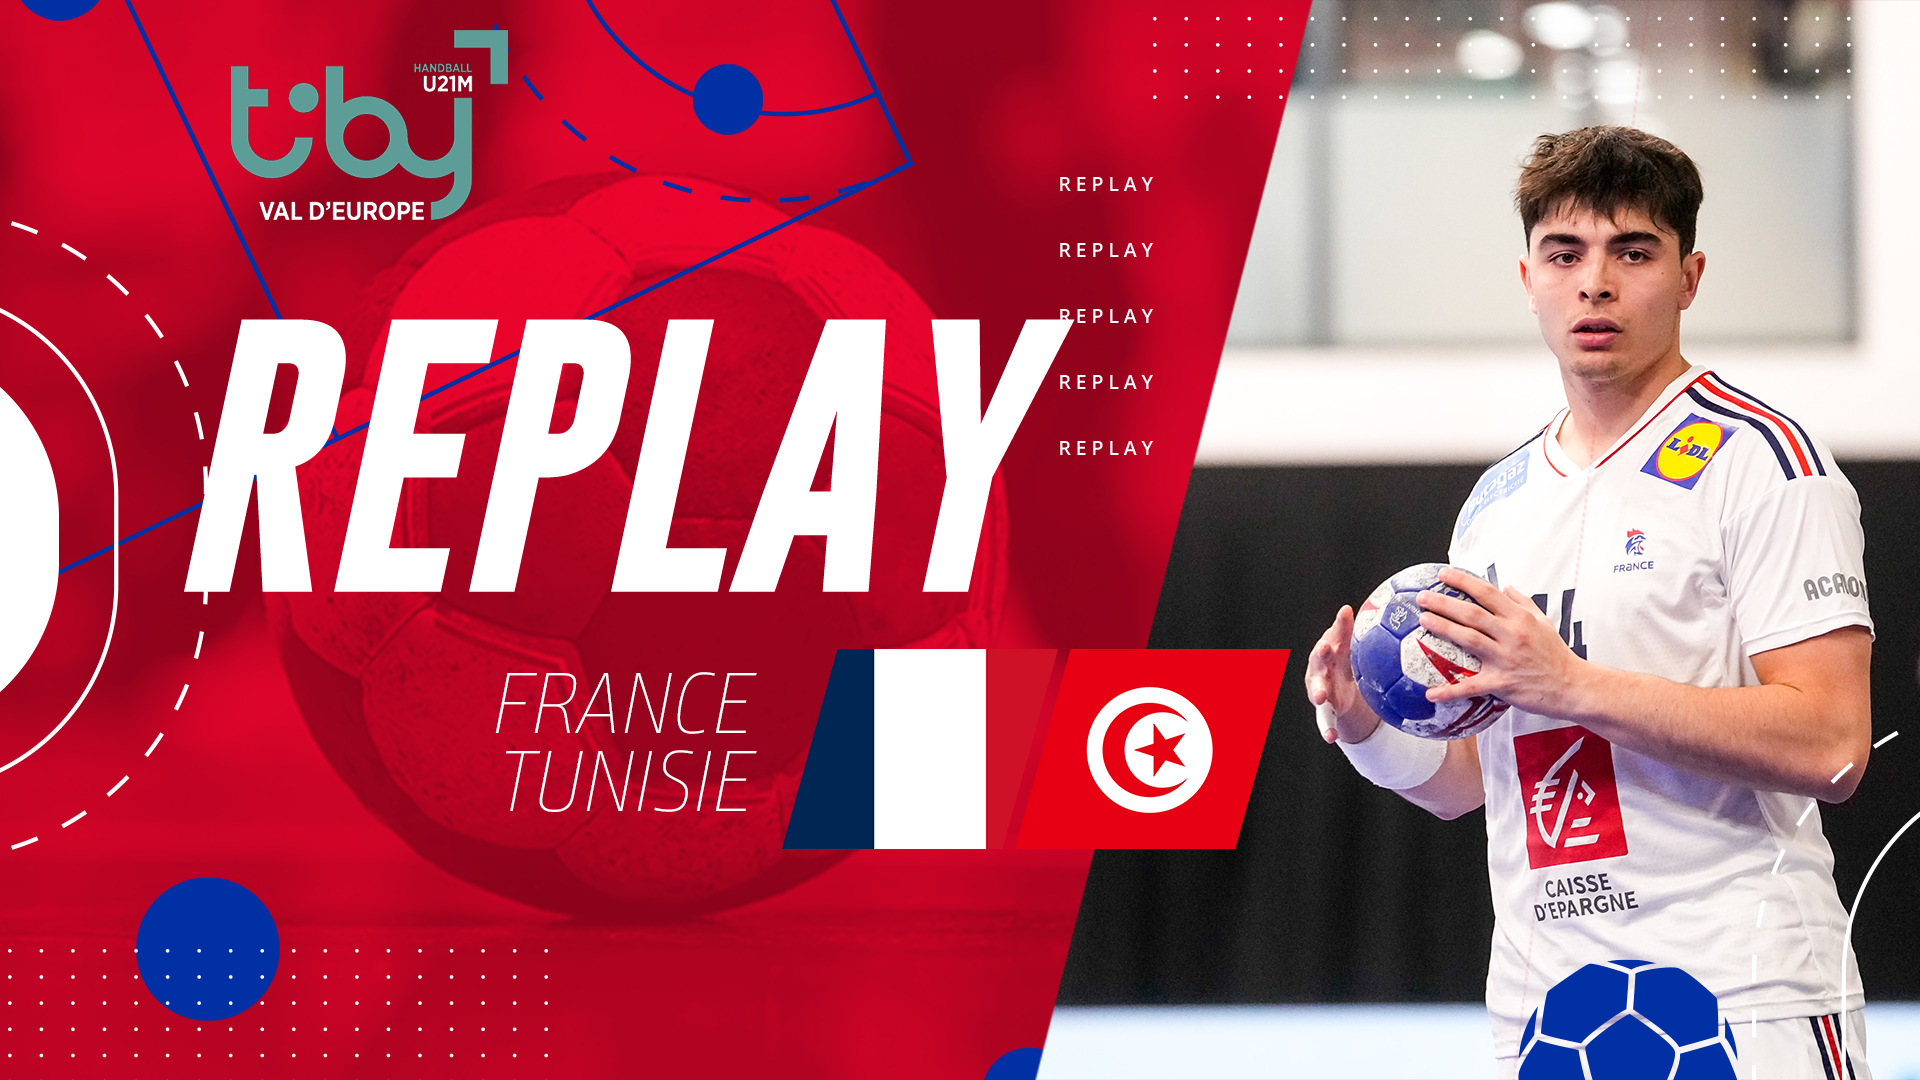 France/Tunisie, le replay